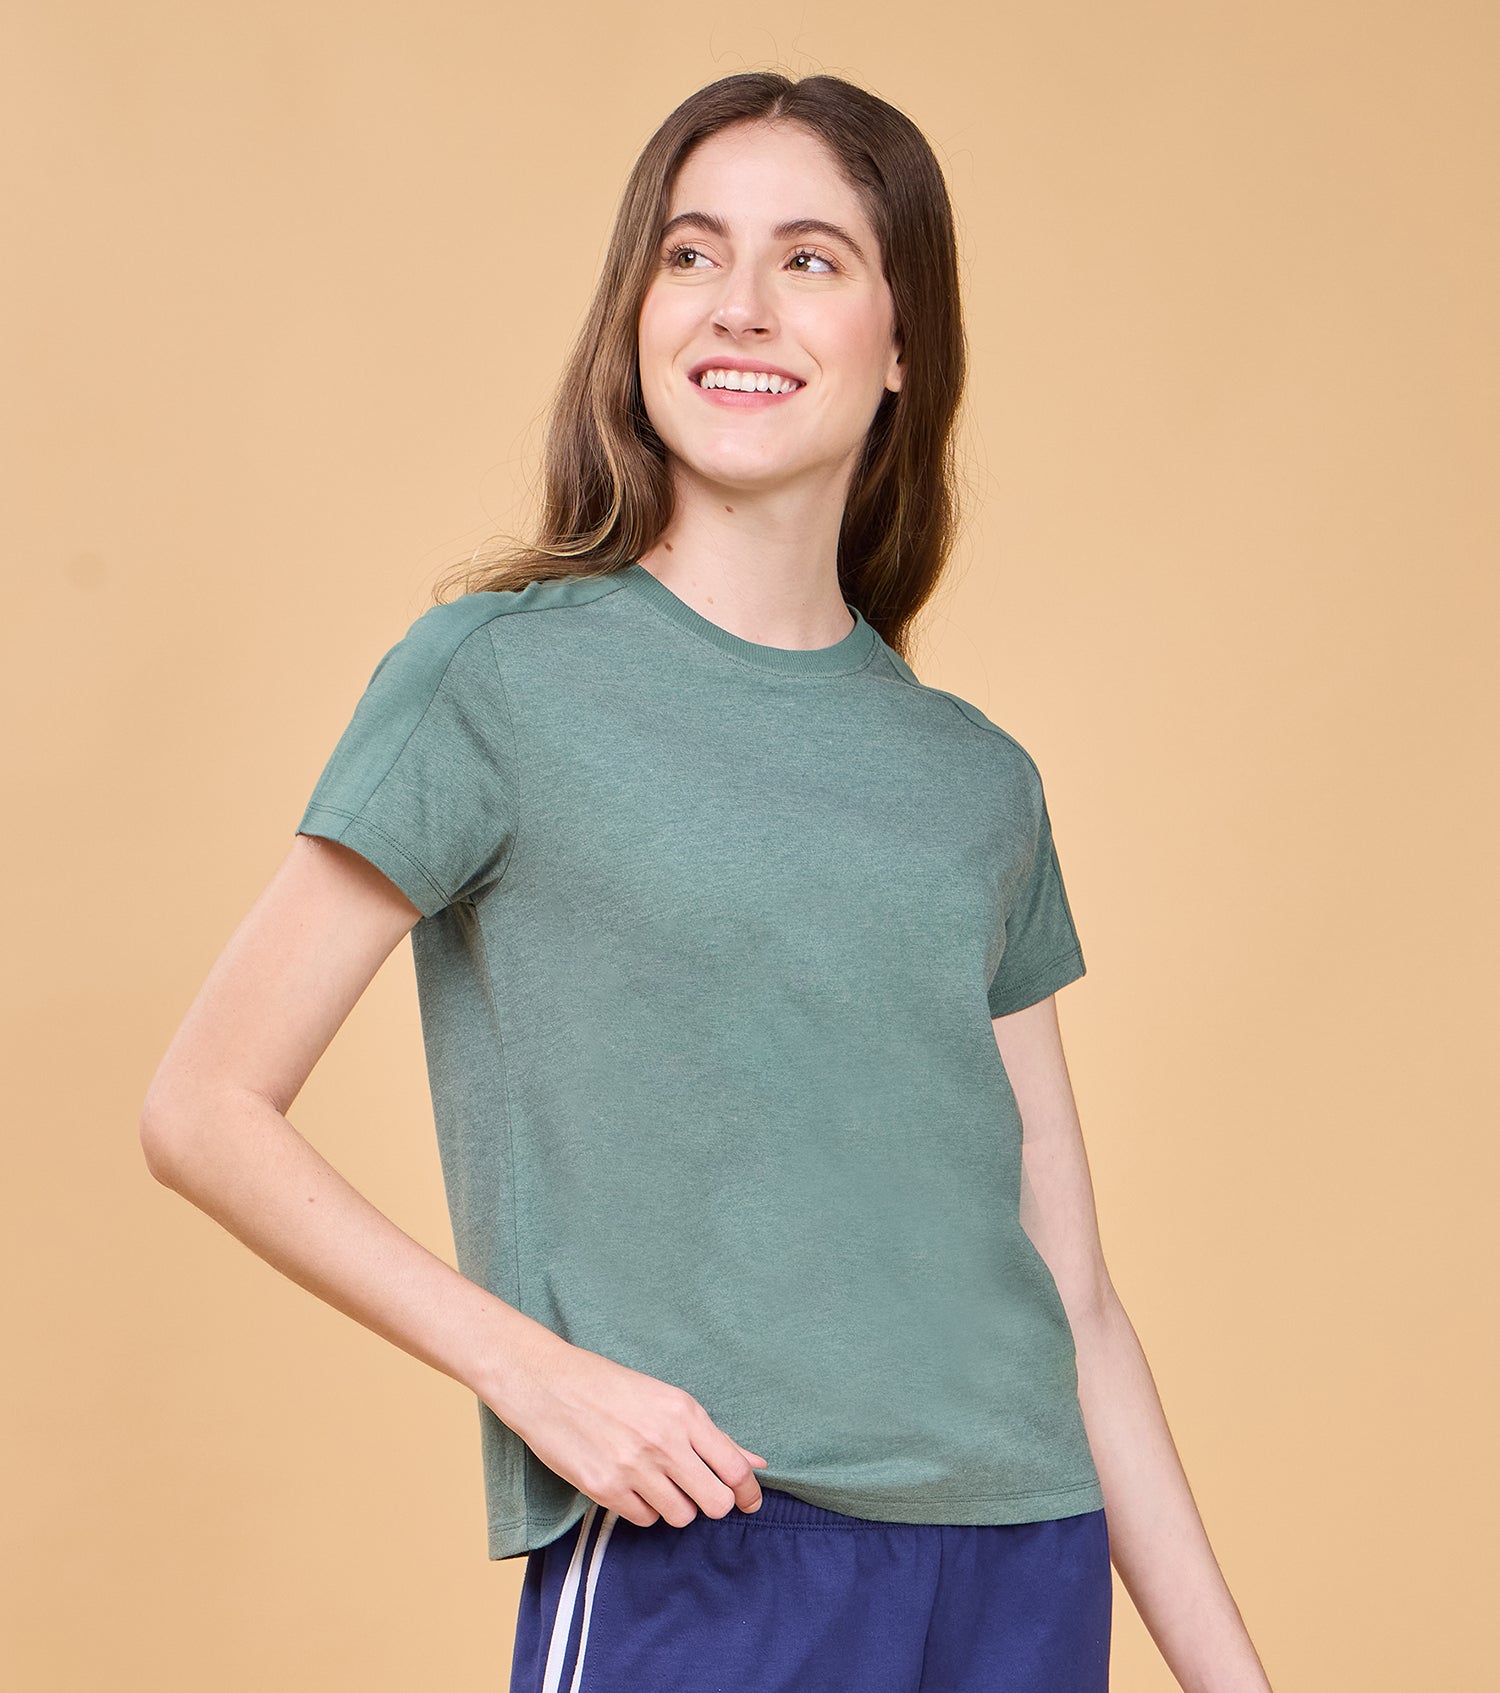 Enamor E306 Basic Cut and Sew Tee - Short Sleeve Cotton T-Shirt with Classic Cut & Sew Detail